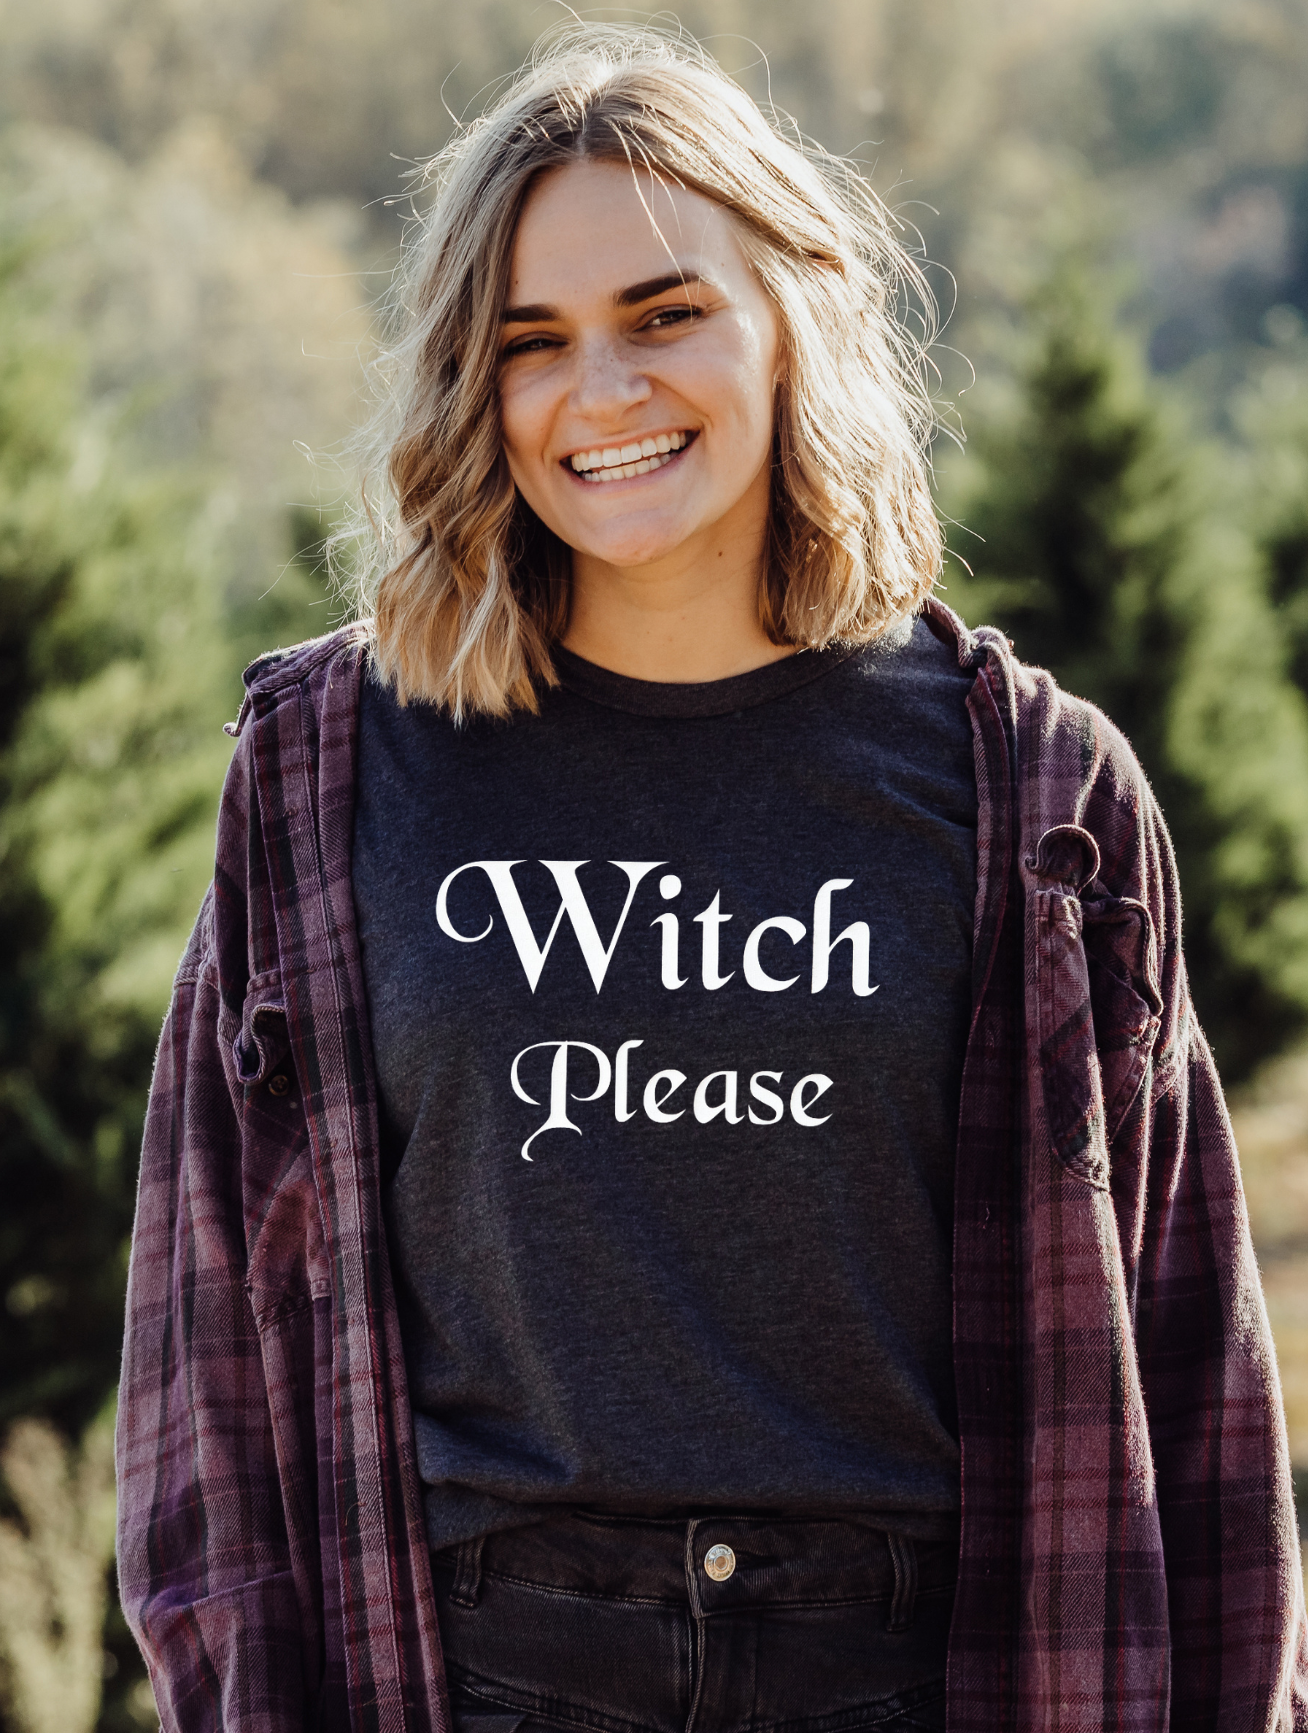 Witch Please - Unisex Adult T-shirt